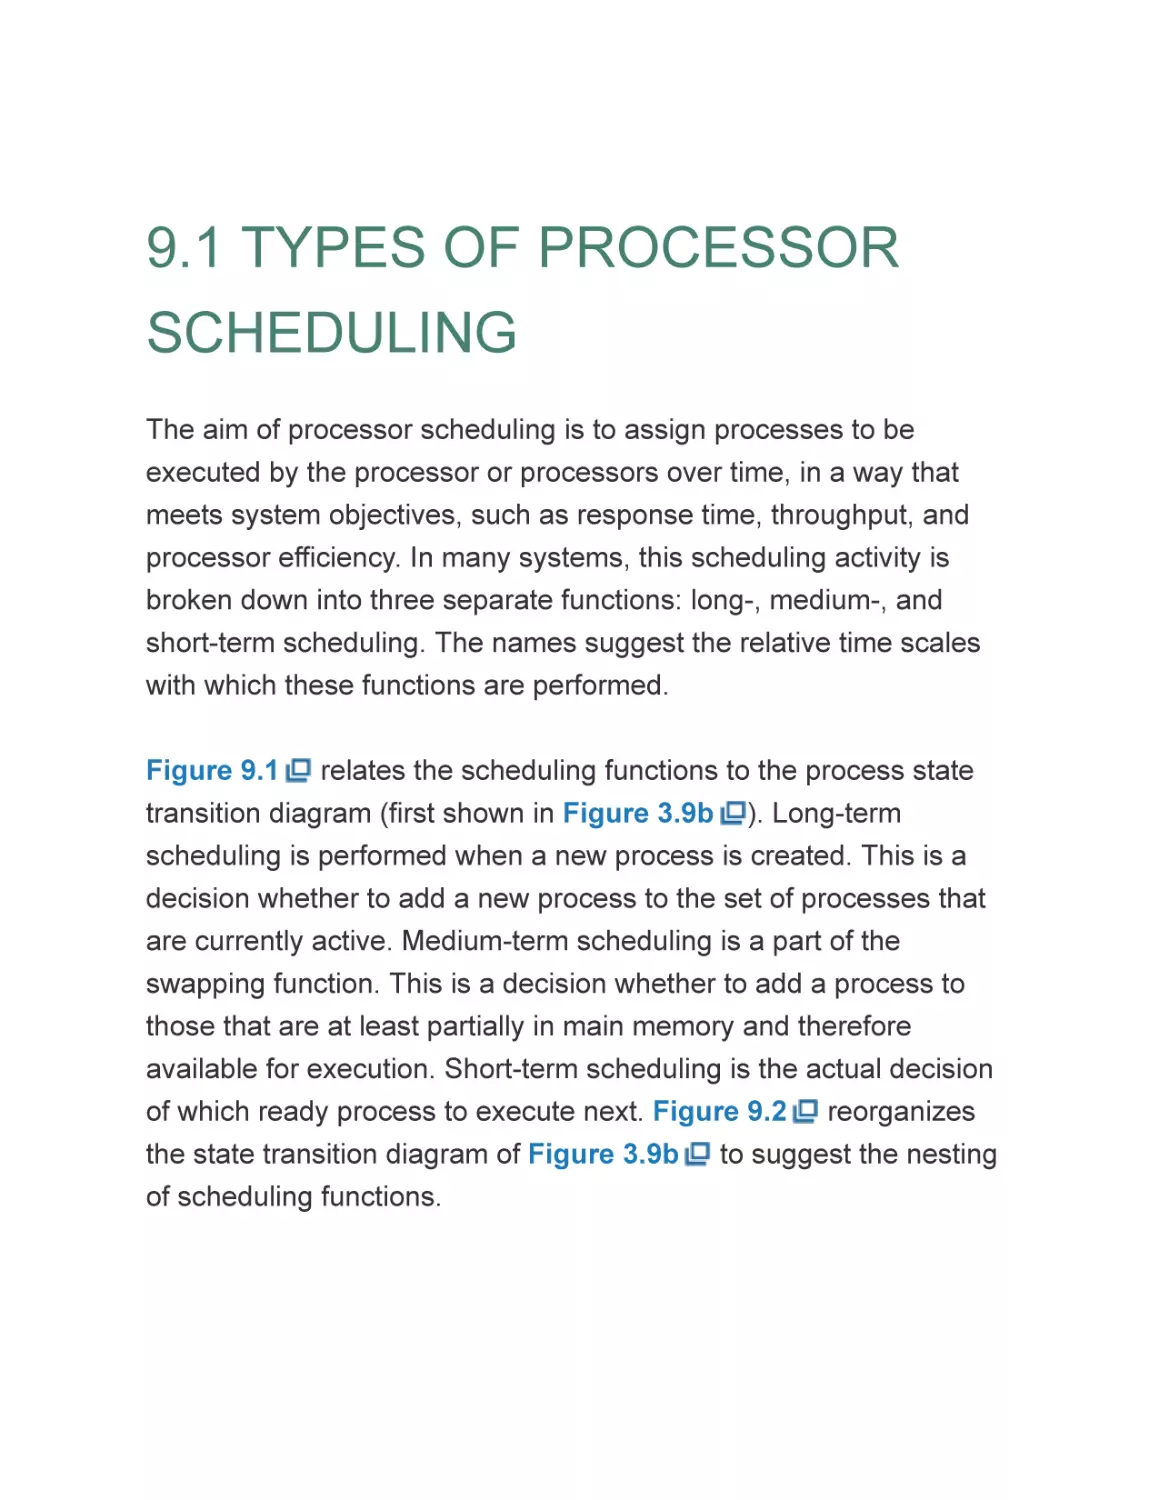 9.1 TYPES OF PROCESSOR SCHEDULING